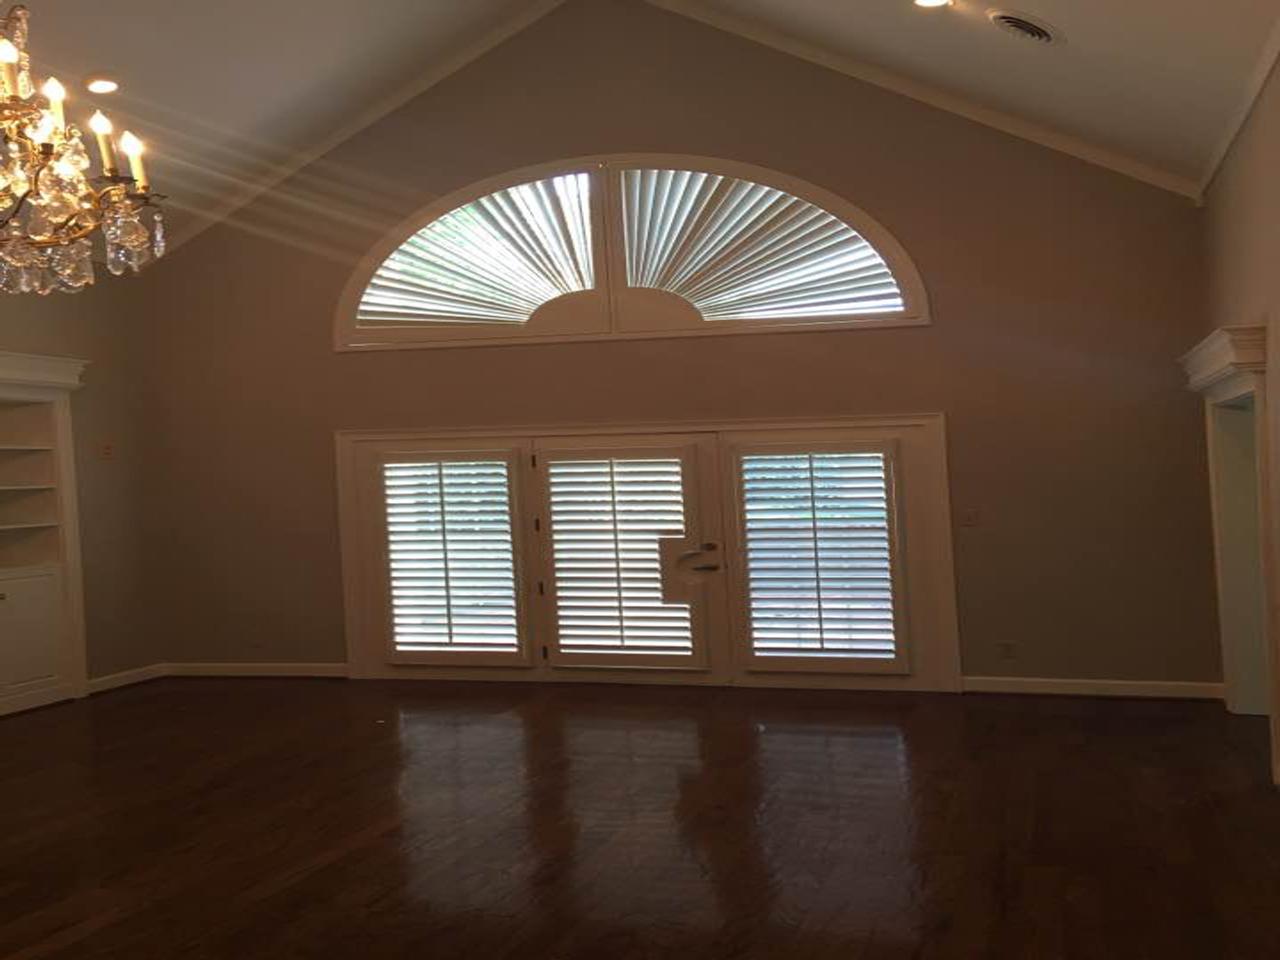 French doors and arched windows with shutters